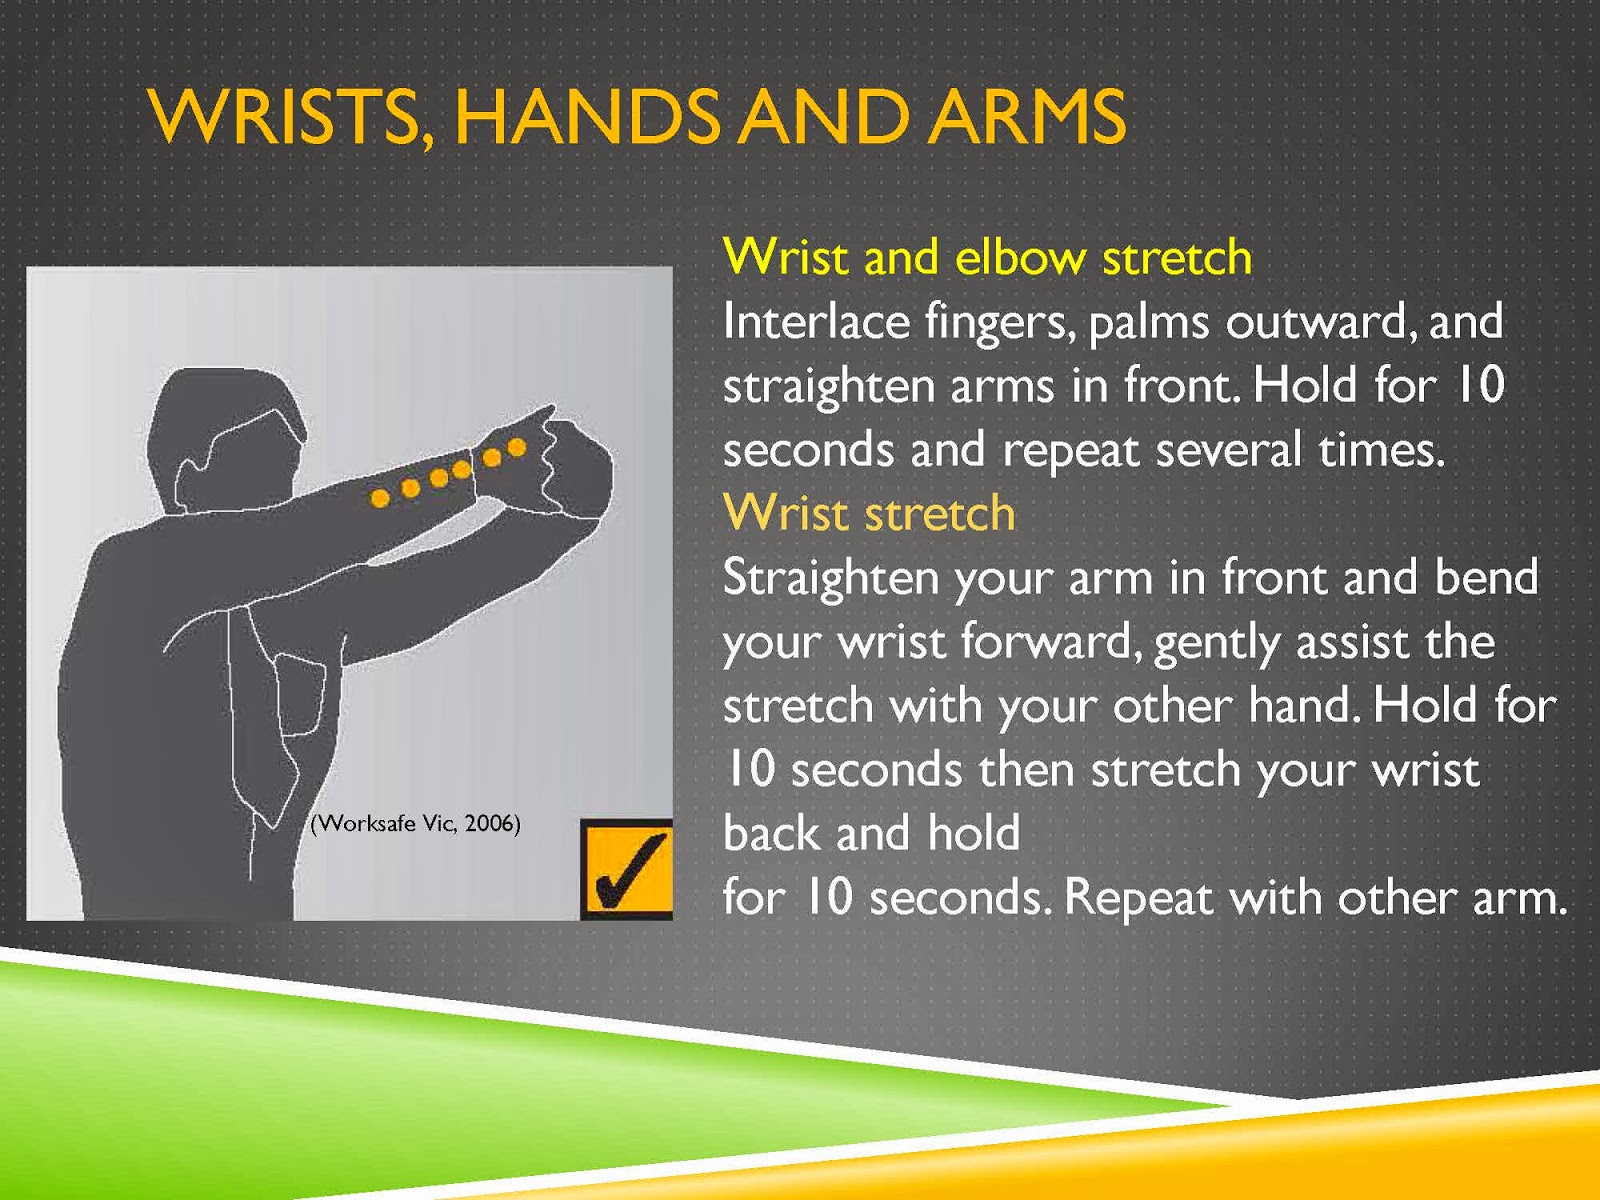 WRISTS, HANDS AND ARMS STRETCH